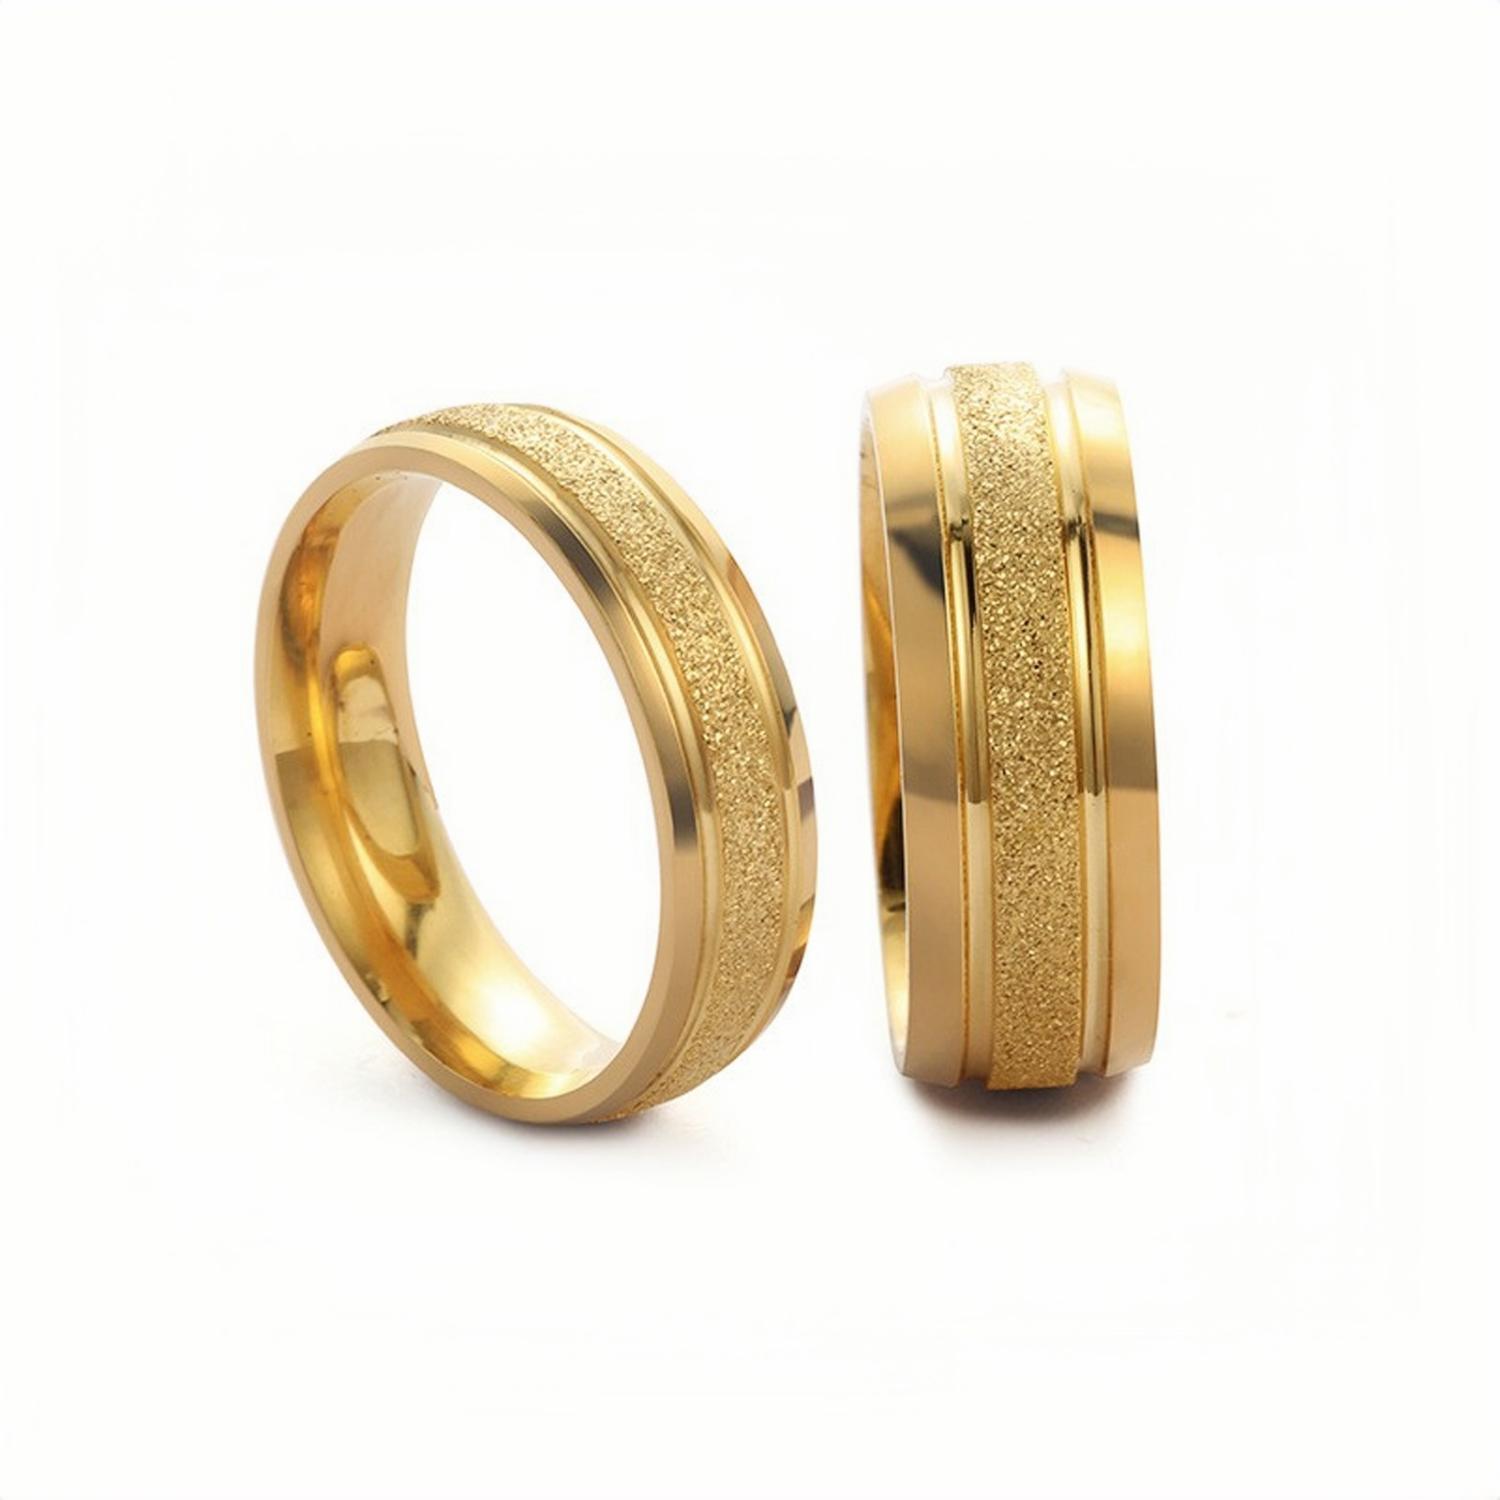 Engravable Simple Frosted Wide Rings For Couples In Titanium - CoupleSets